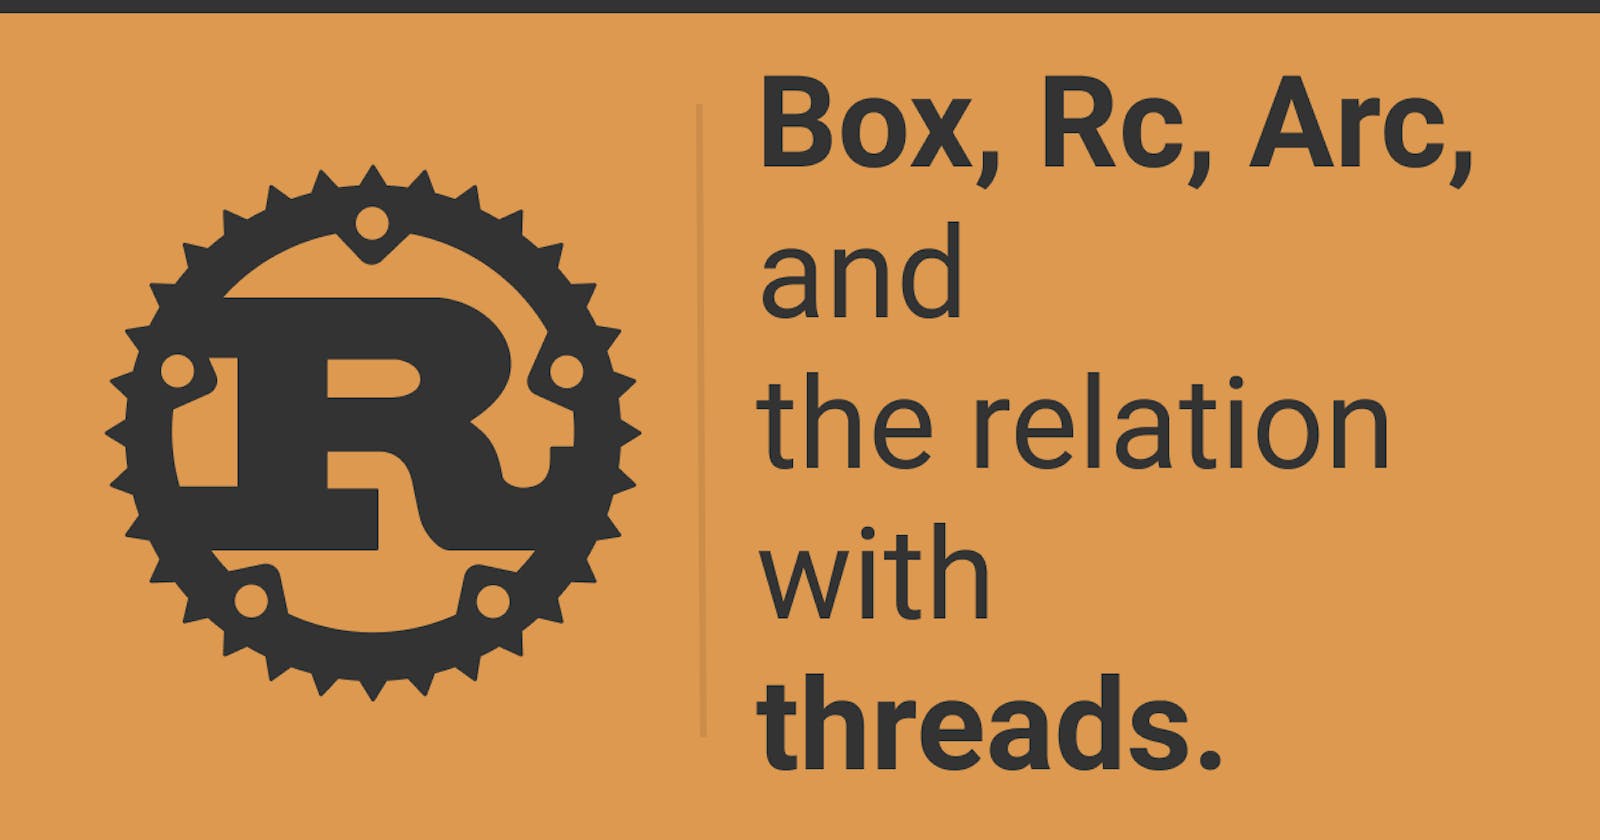 Box, Rc, Arc, and the relation with threads.